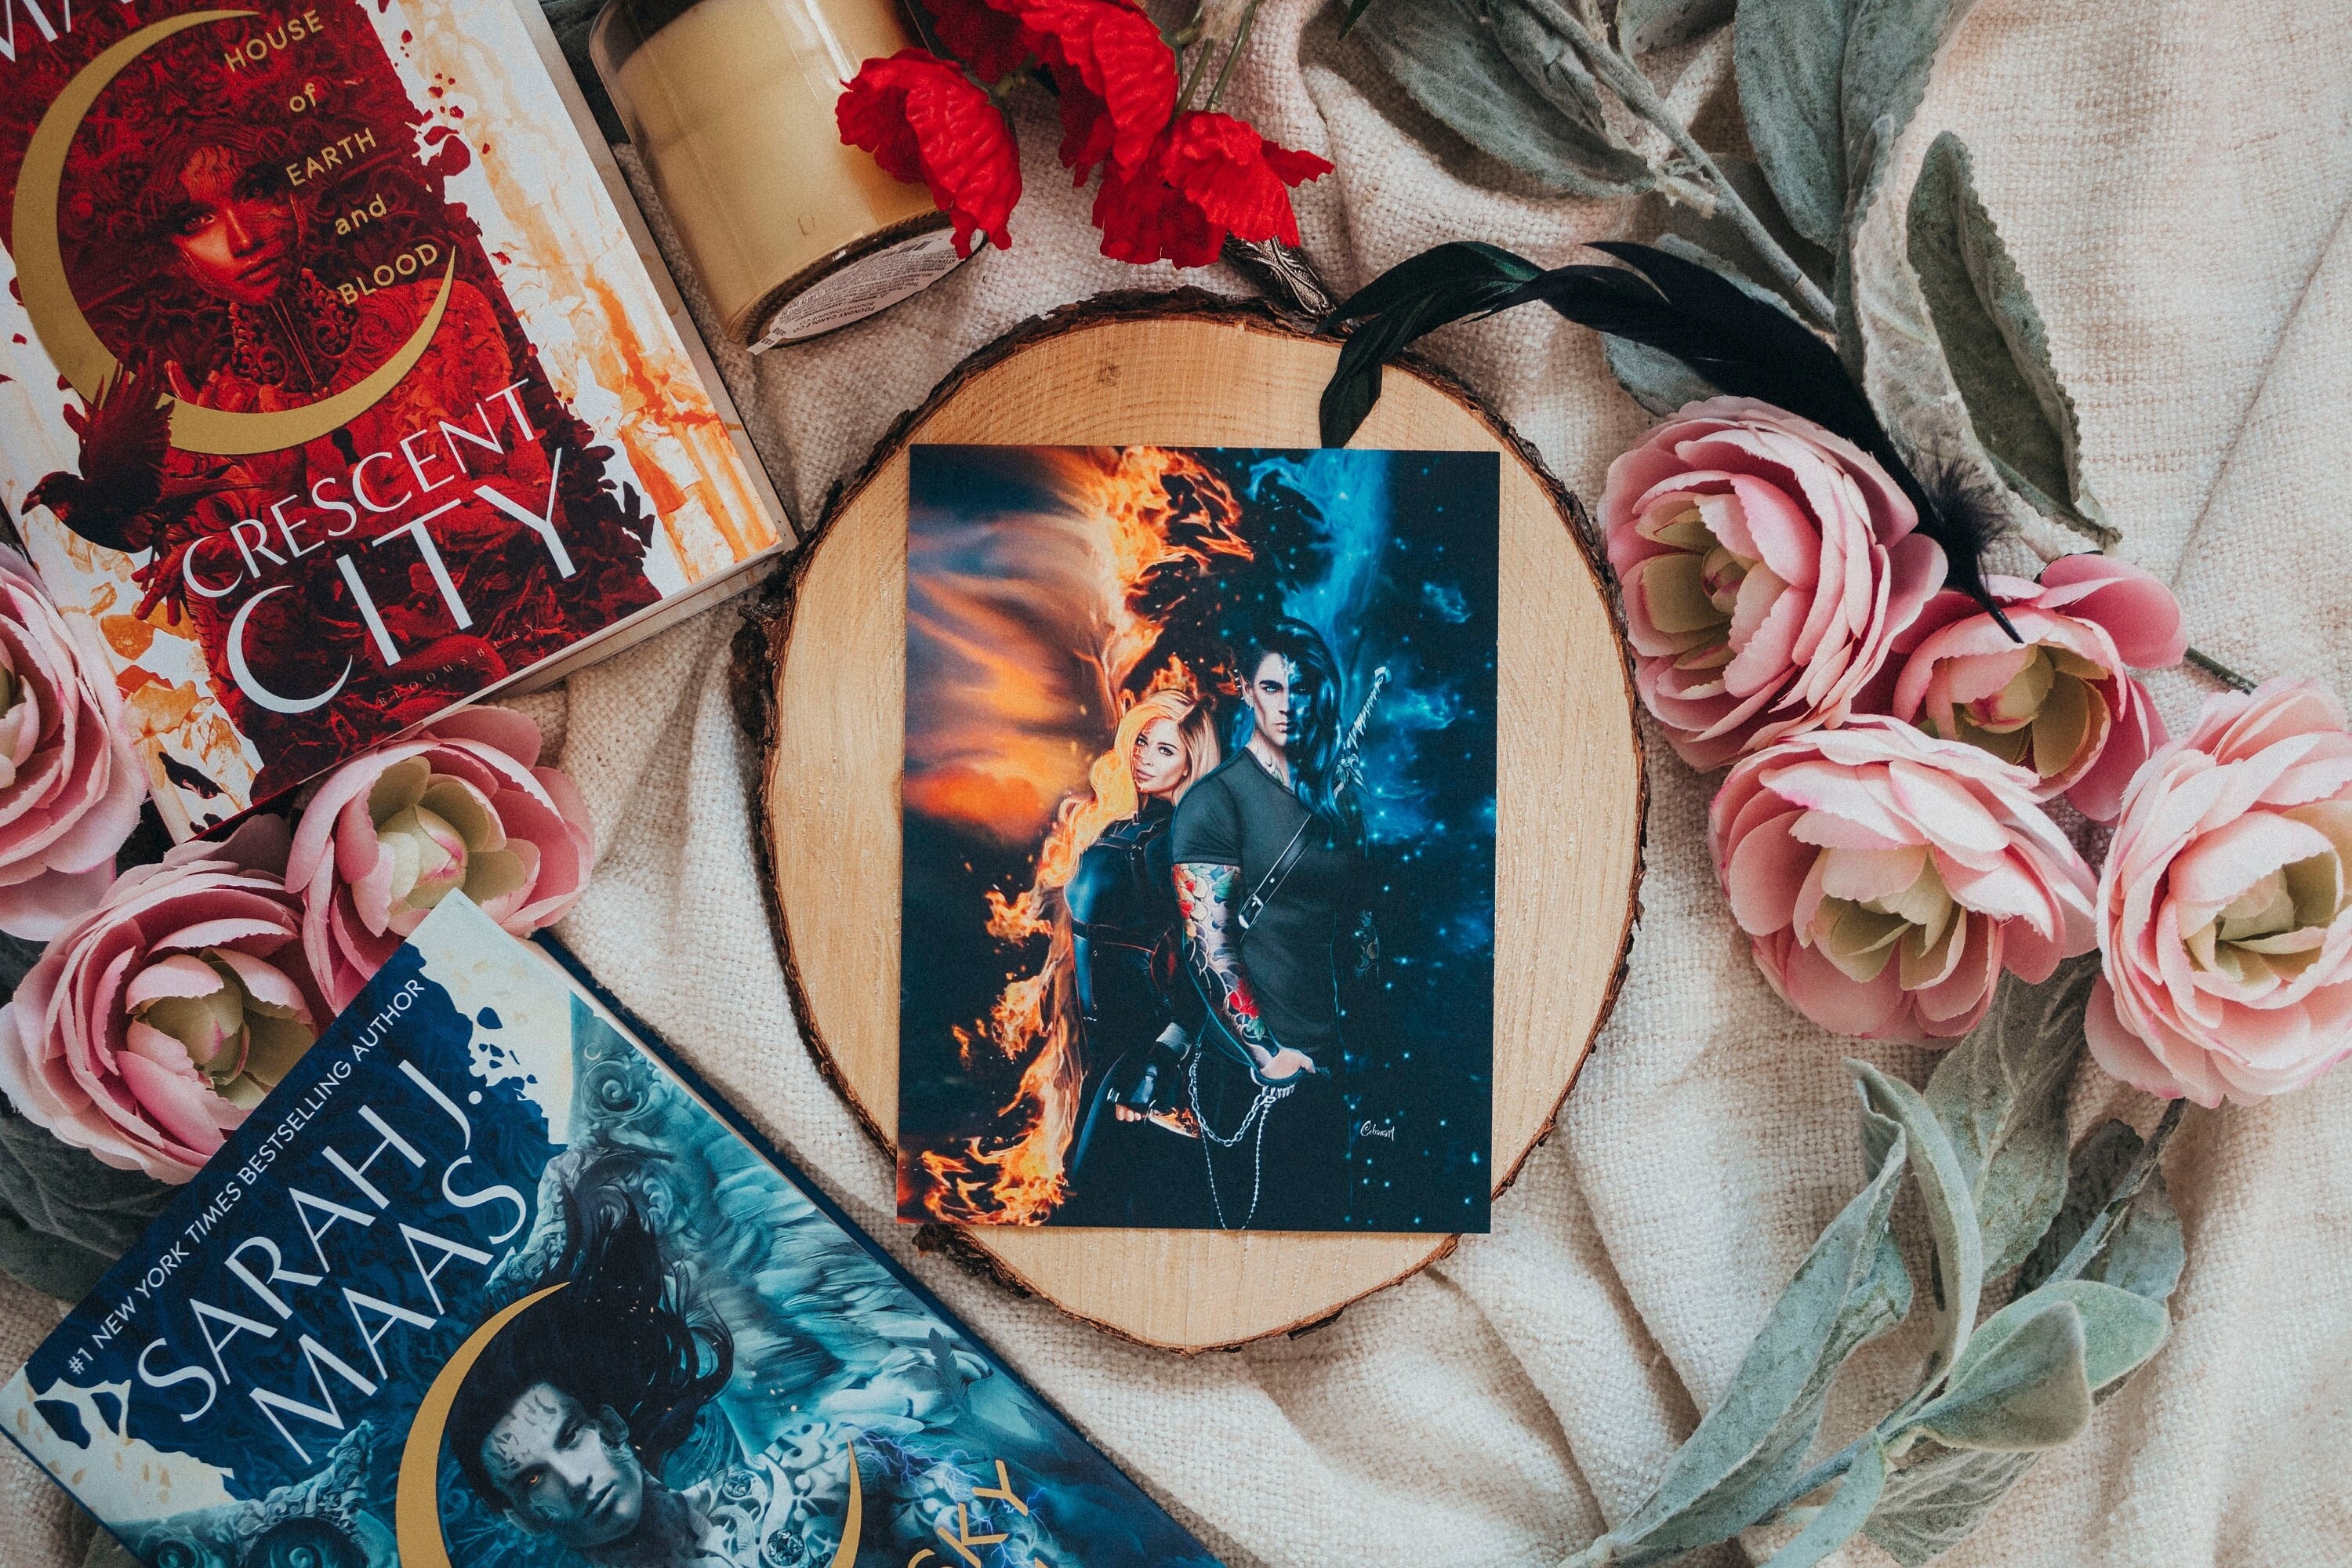 The World of Sarah J. Maas - Behold the simply GORGEOUS covers for